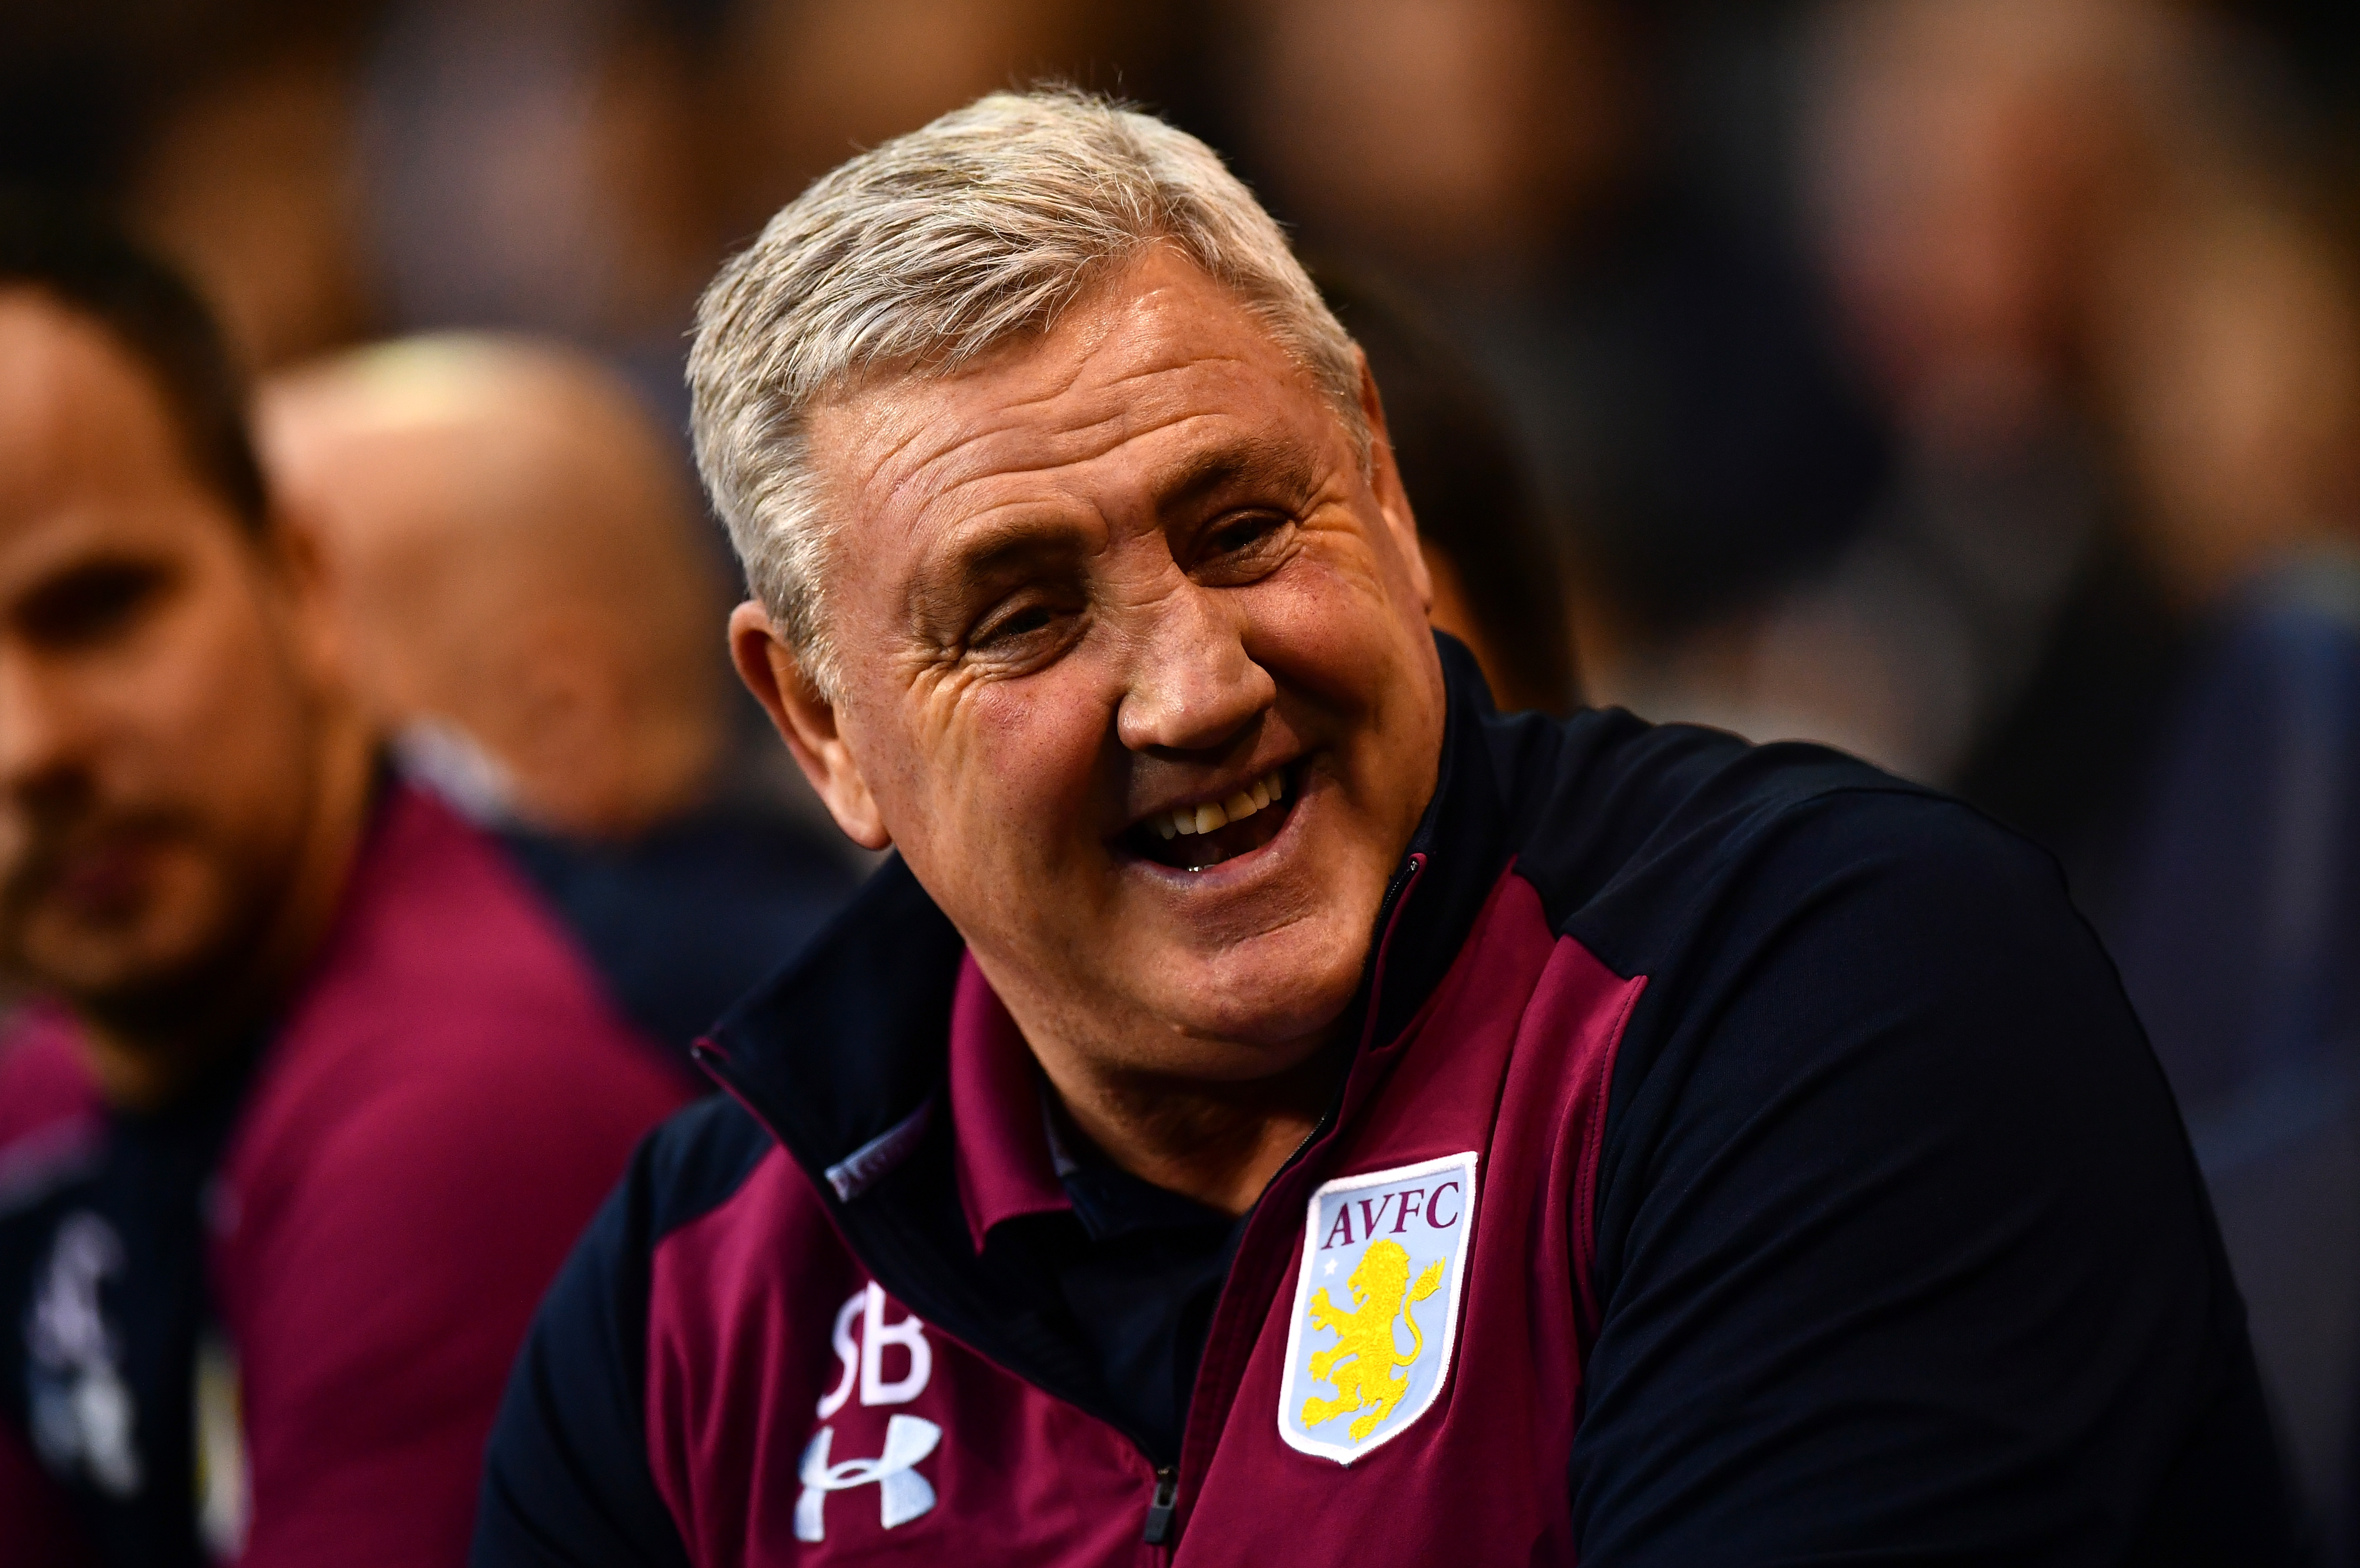 LONDON, ENGLAND - JANUARY 08:  Steve Bruce, Manager of Aston Villa smiles prior to The Emirates FA Cup Third Round match between Tottenham Hotspur and Aston Villa at White Hart Lane on January 8, 2017 in London, England.  (Photo by Dan Mullan/Getty Images)